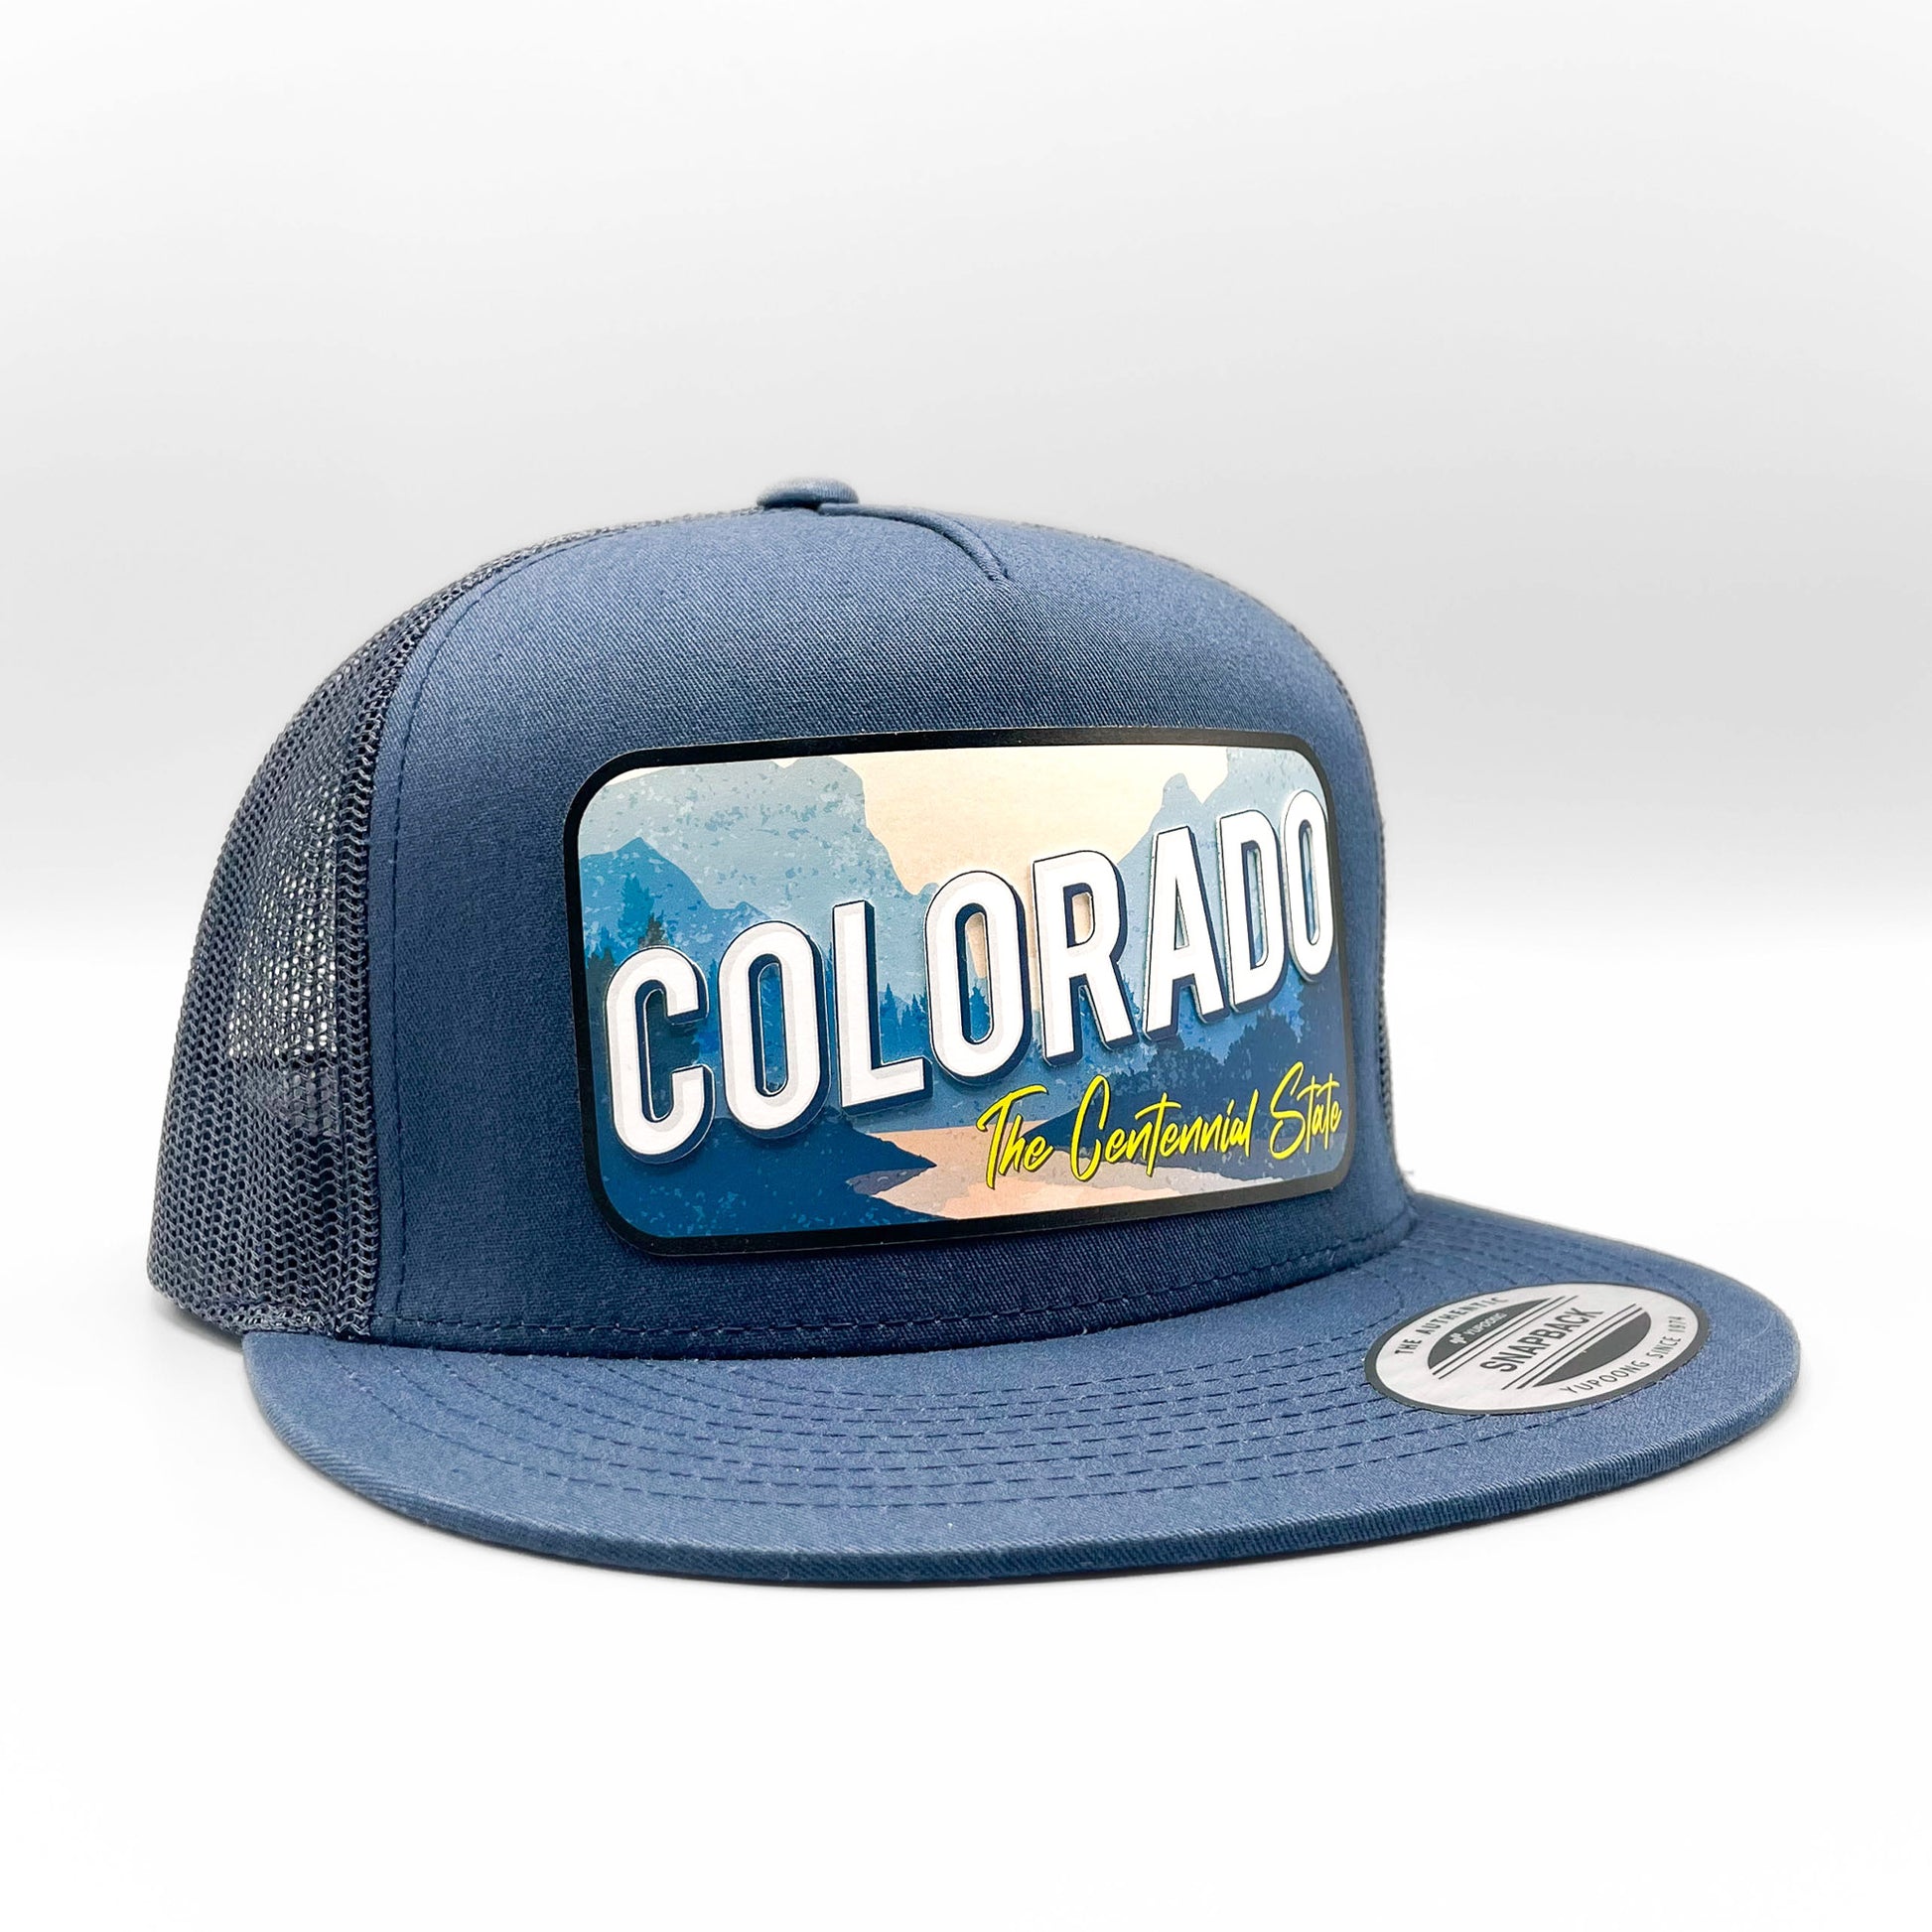 Colorado Trucker Hat, License Plate Design On Navy Yupoong 6006 Classic Snapback